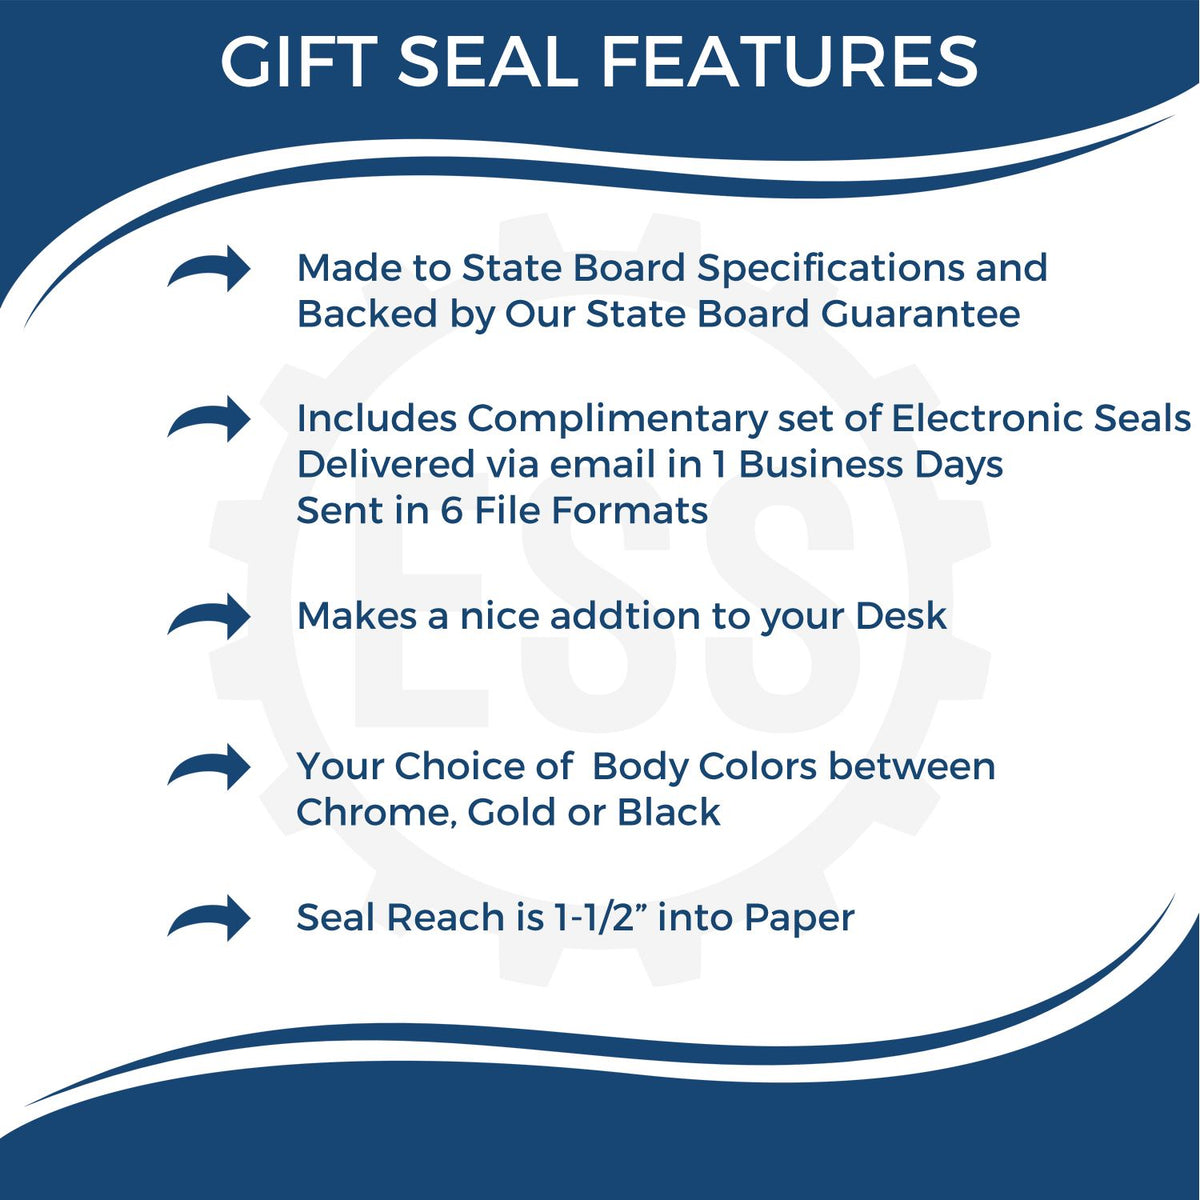 A picture of an infographic highlighting the selling points for the Gift Minnesota Engineer Seal